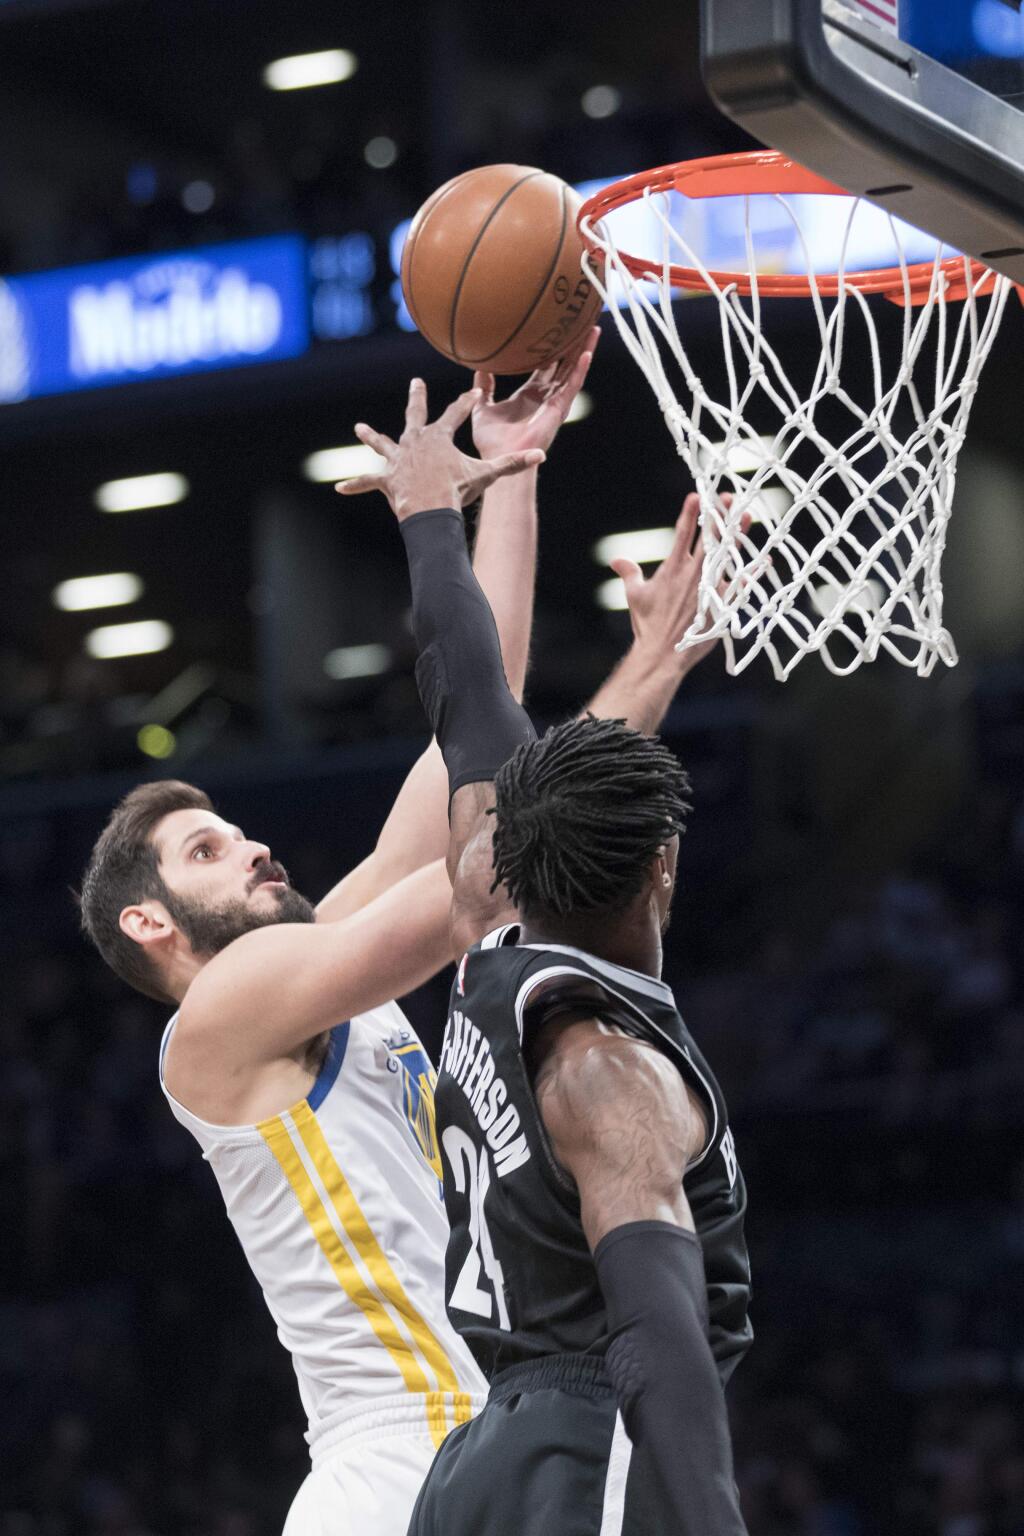 The Golden State Warriors forward Omri Casspi, left, goes to the basket against Brooklyn Nets forward Rondae Hollis-Jefferson during the first half Sunday, Nov. 19, 2017, in New York. (AP Photo/Mary Altaffer)